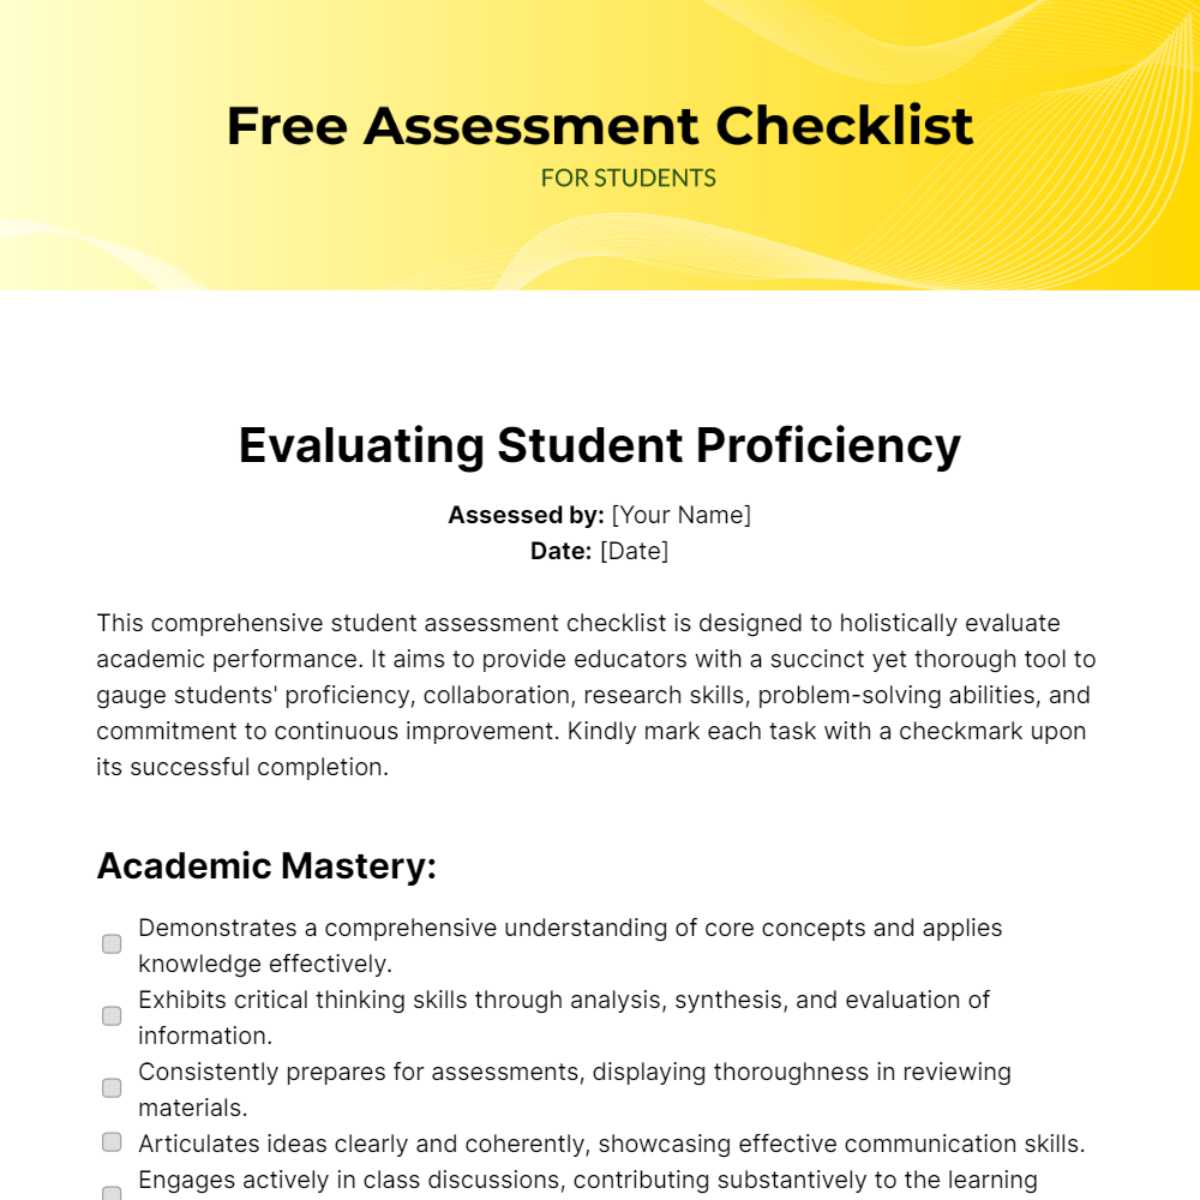 Assessment Checklist for Students Template